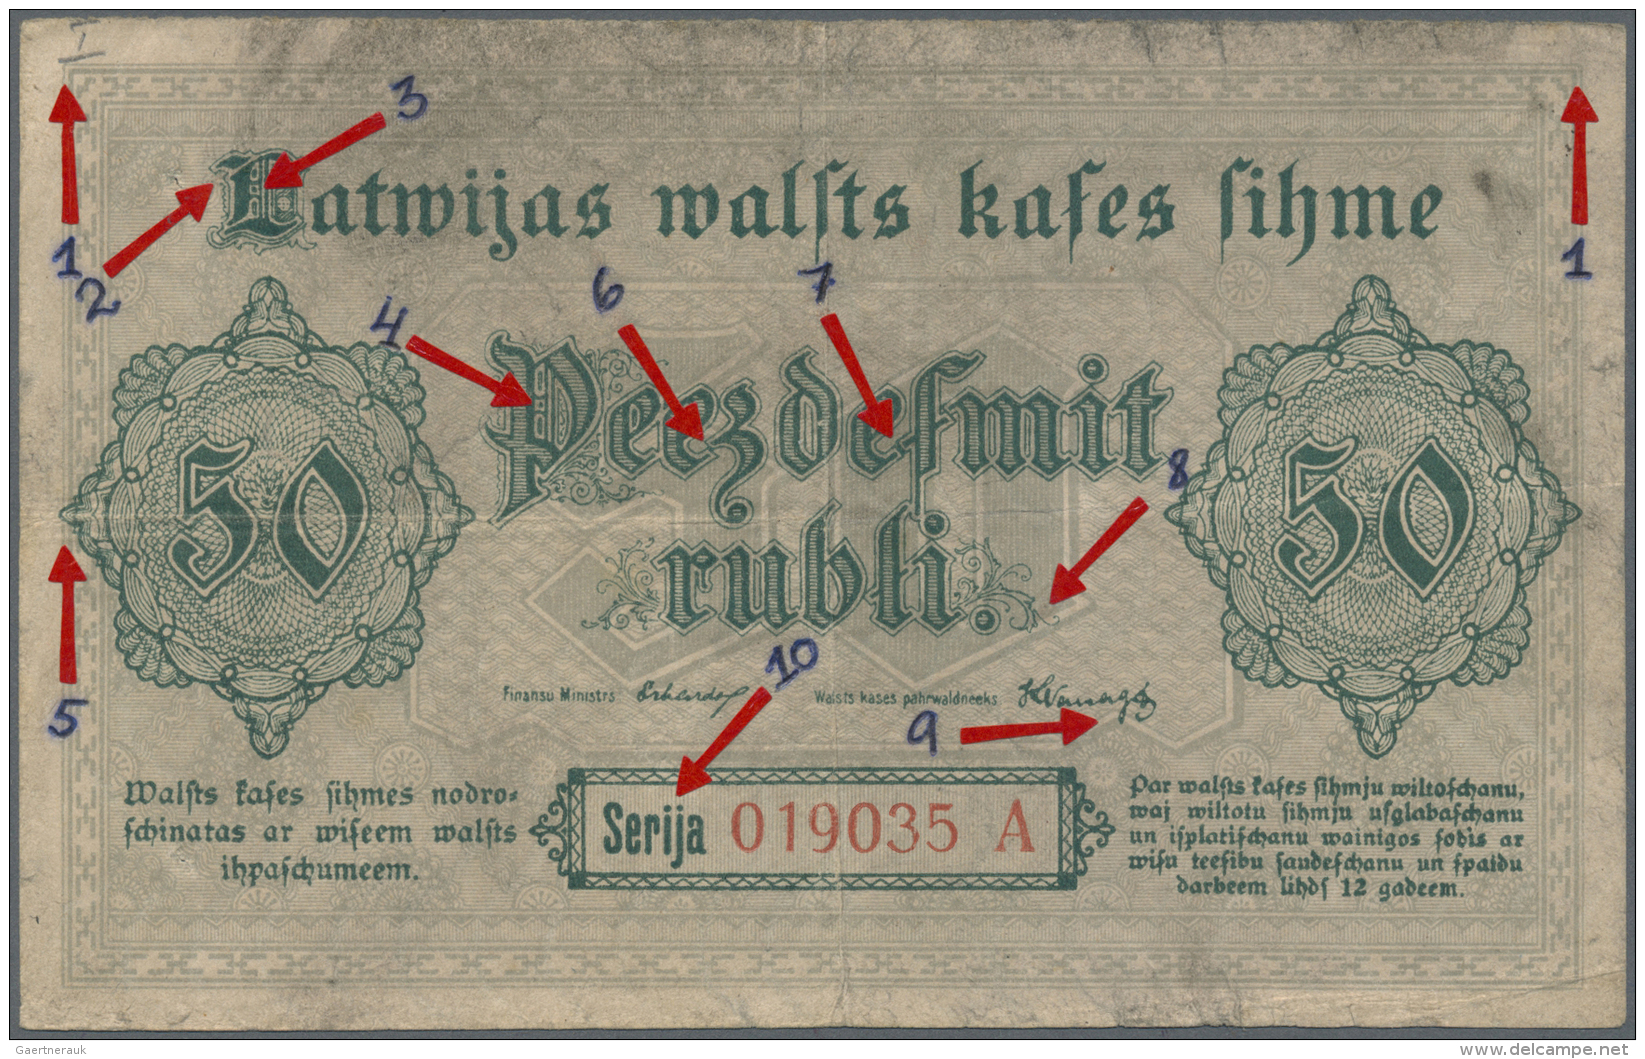 Latvia /Lettland: Rare Contemporary Forgery Of 50 Rubli 1919, Series A, P. 6(f), Ex A. Rucins Collection. Russians Were - Lettonie